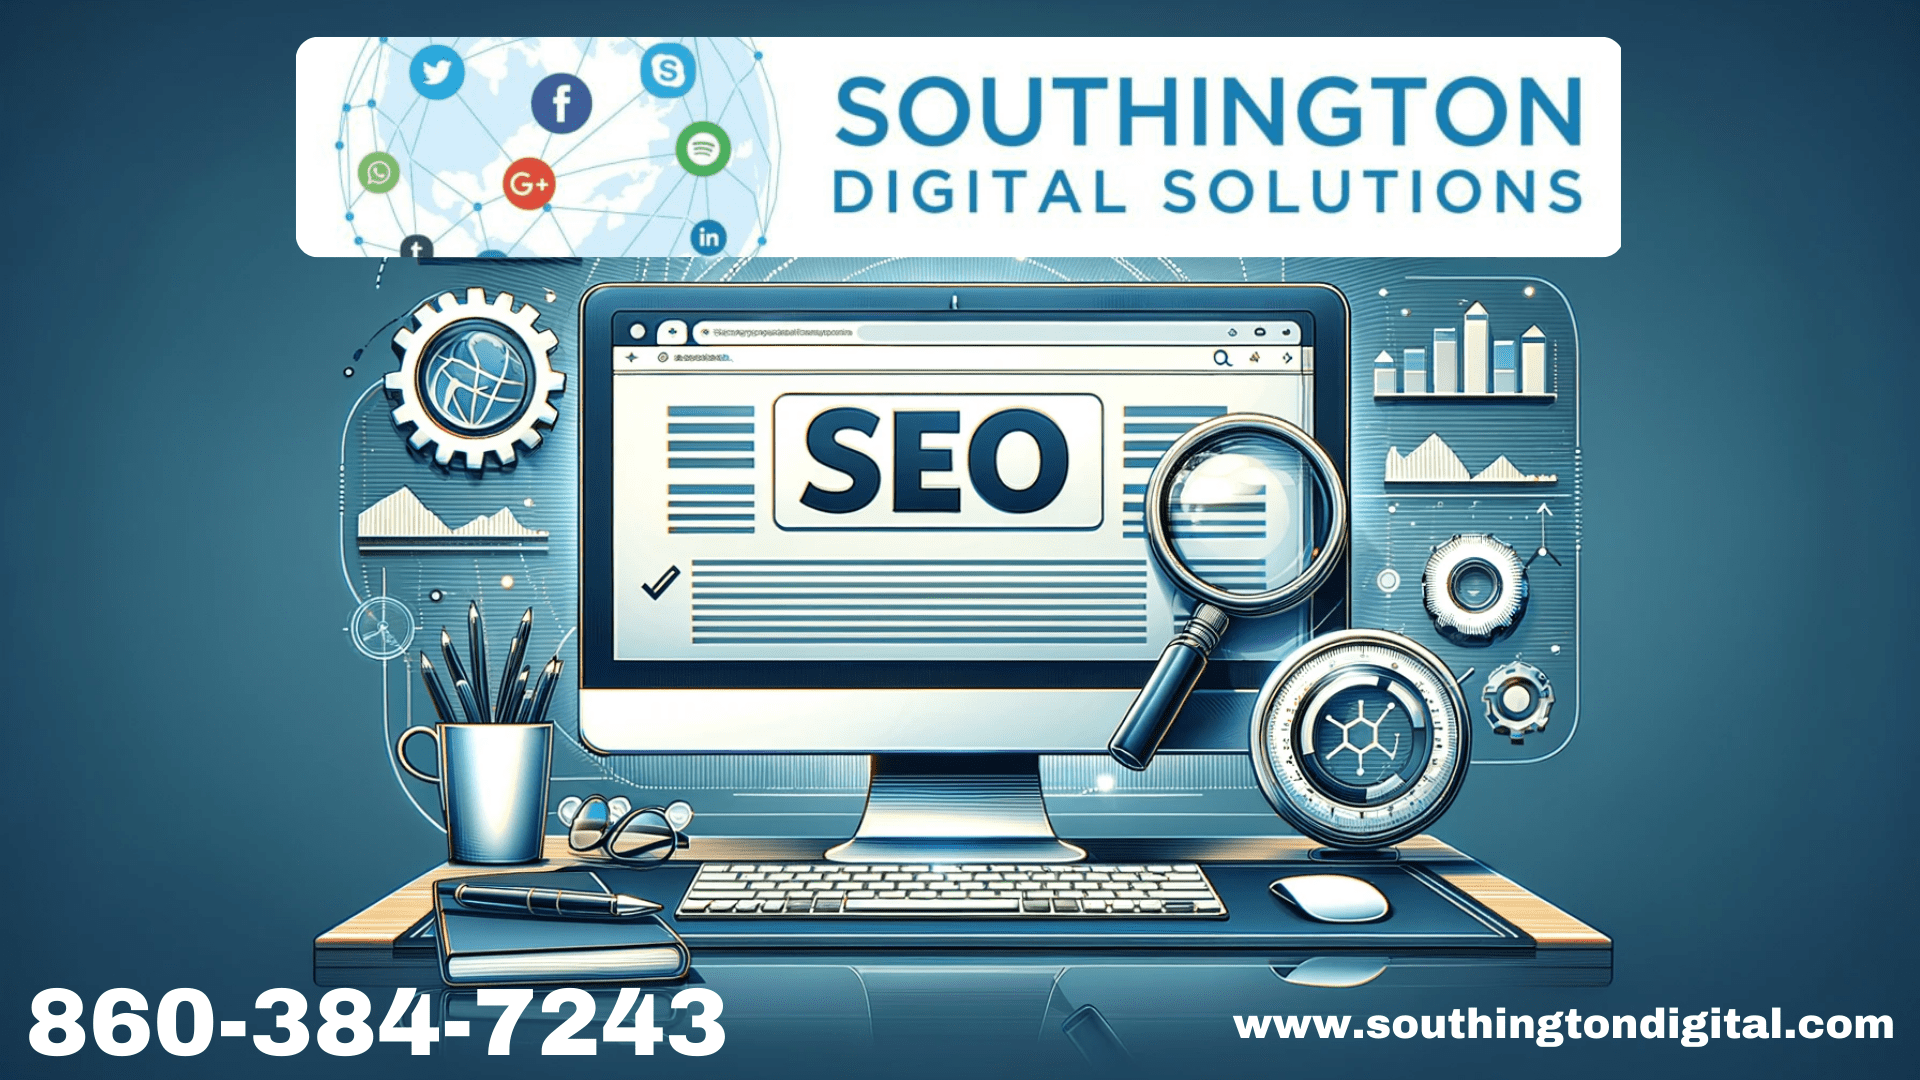 Digital marketing agency SEO services banner displaying a computer screen with search engine results, magnifying glass on 'SEO', and website optimization symbols like gears and graphs, ideal for enhancing online visibility and search engine ranking.